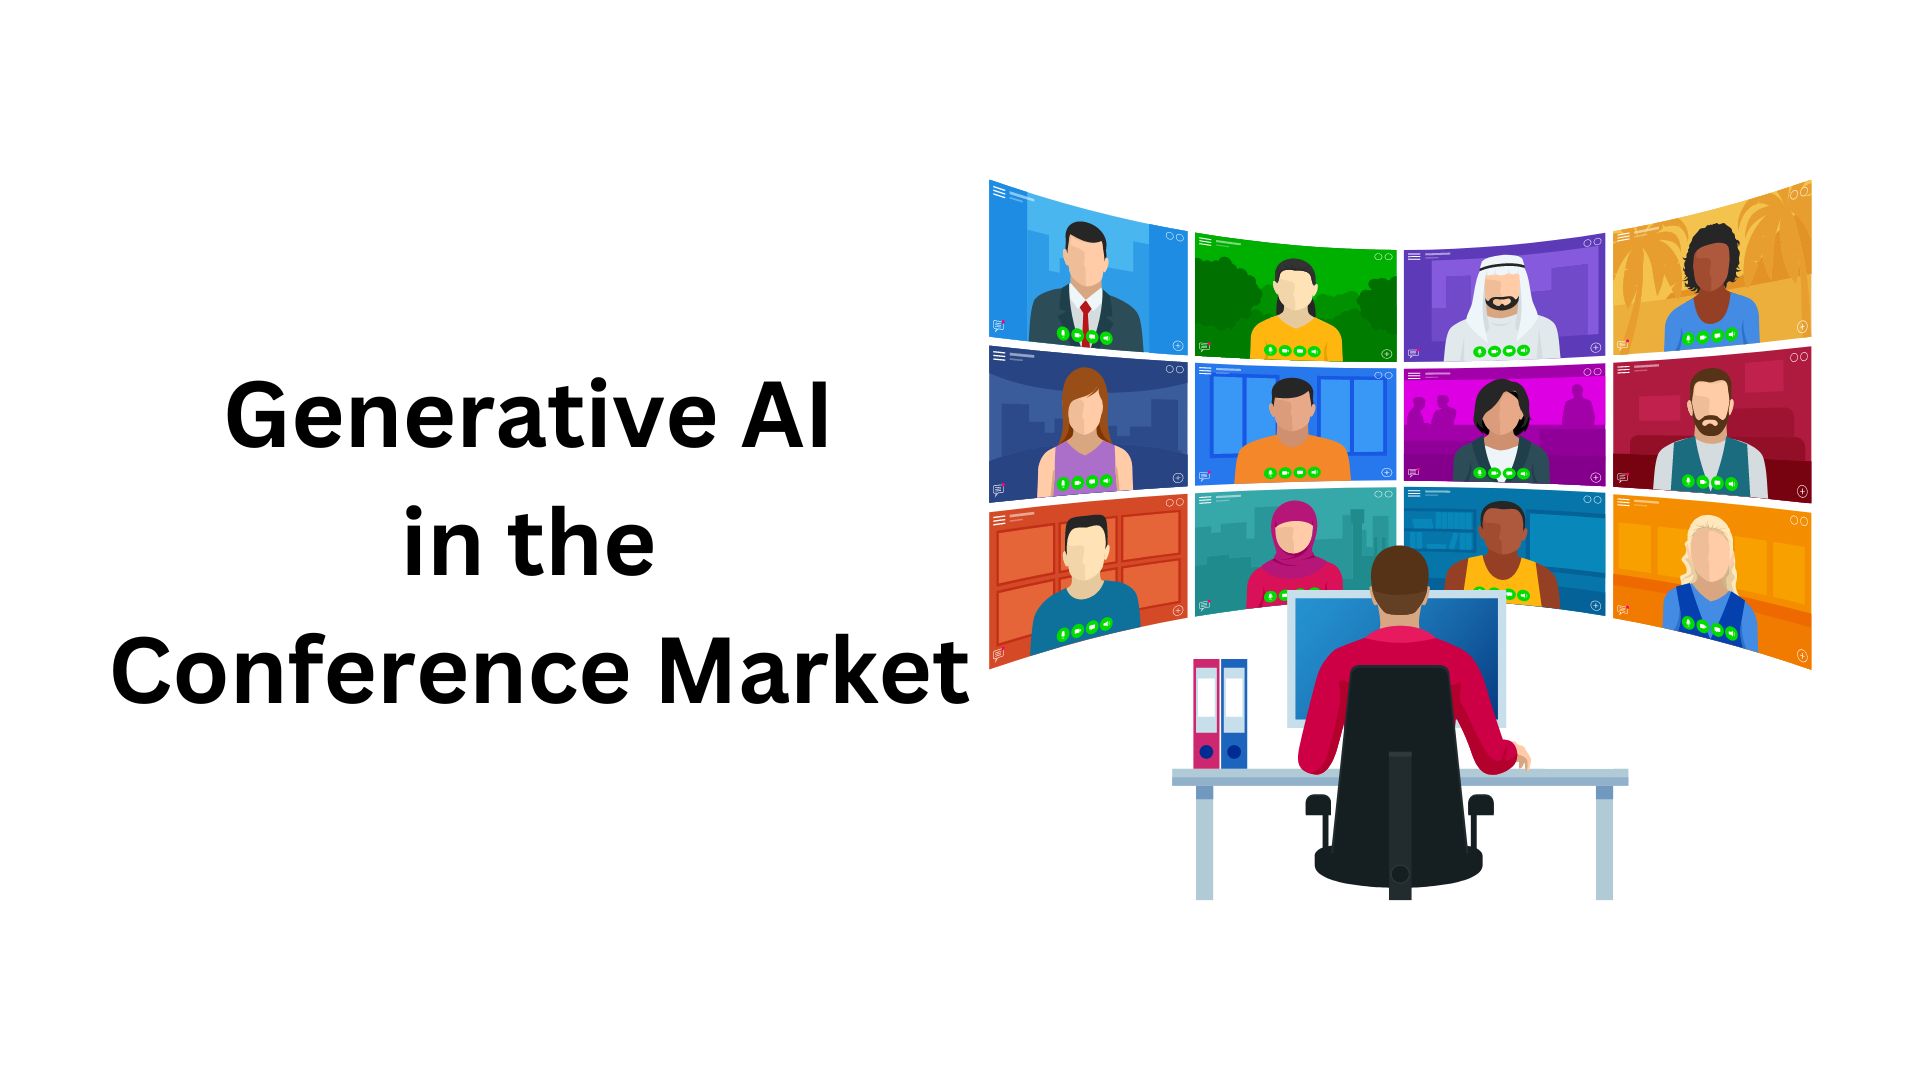 Generative AI in the Conference Market Sales to Top USD 588.7 Million in Revenues by 2033 at a CAGR of 18.5%